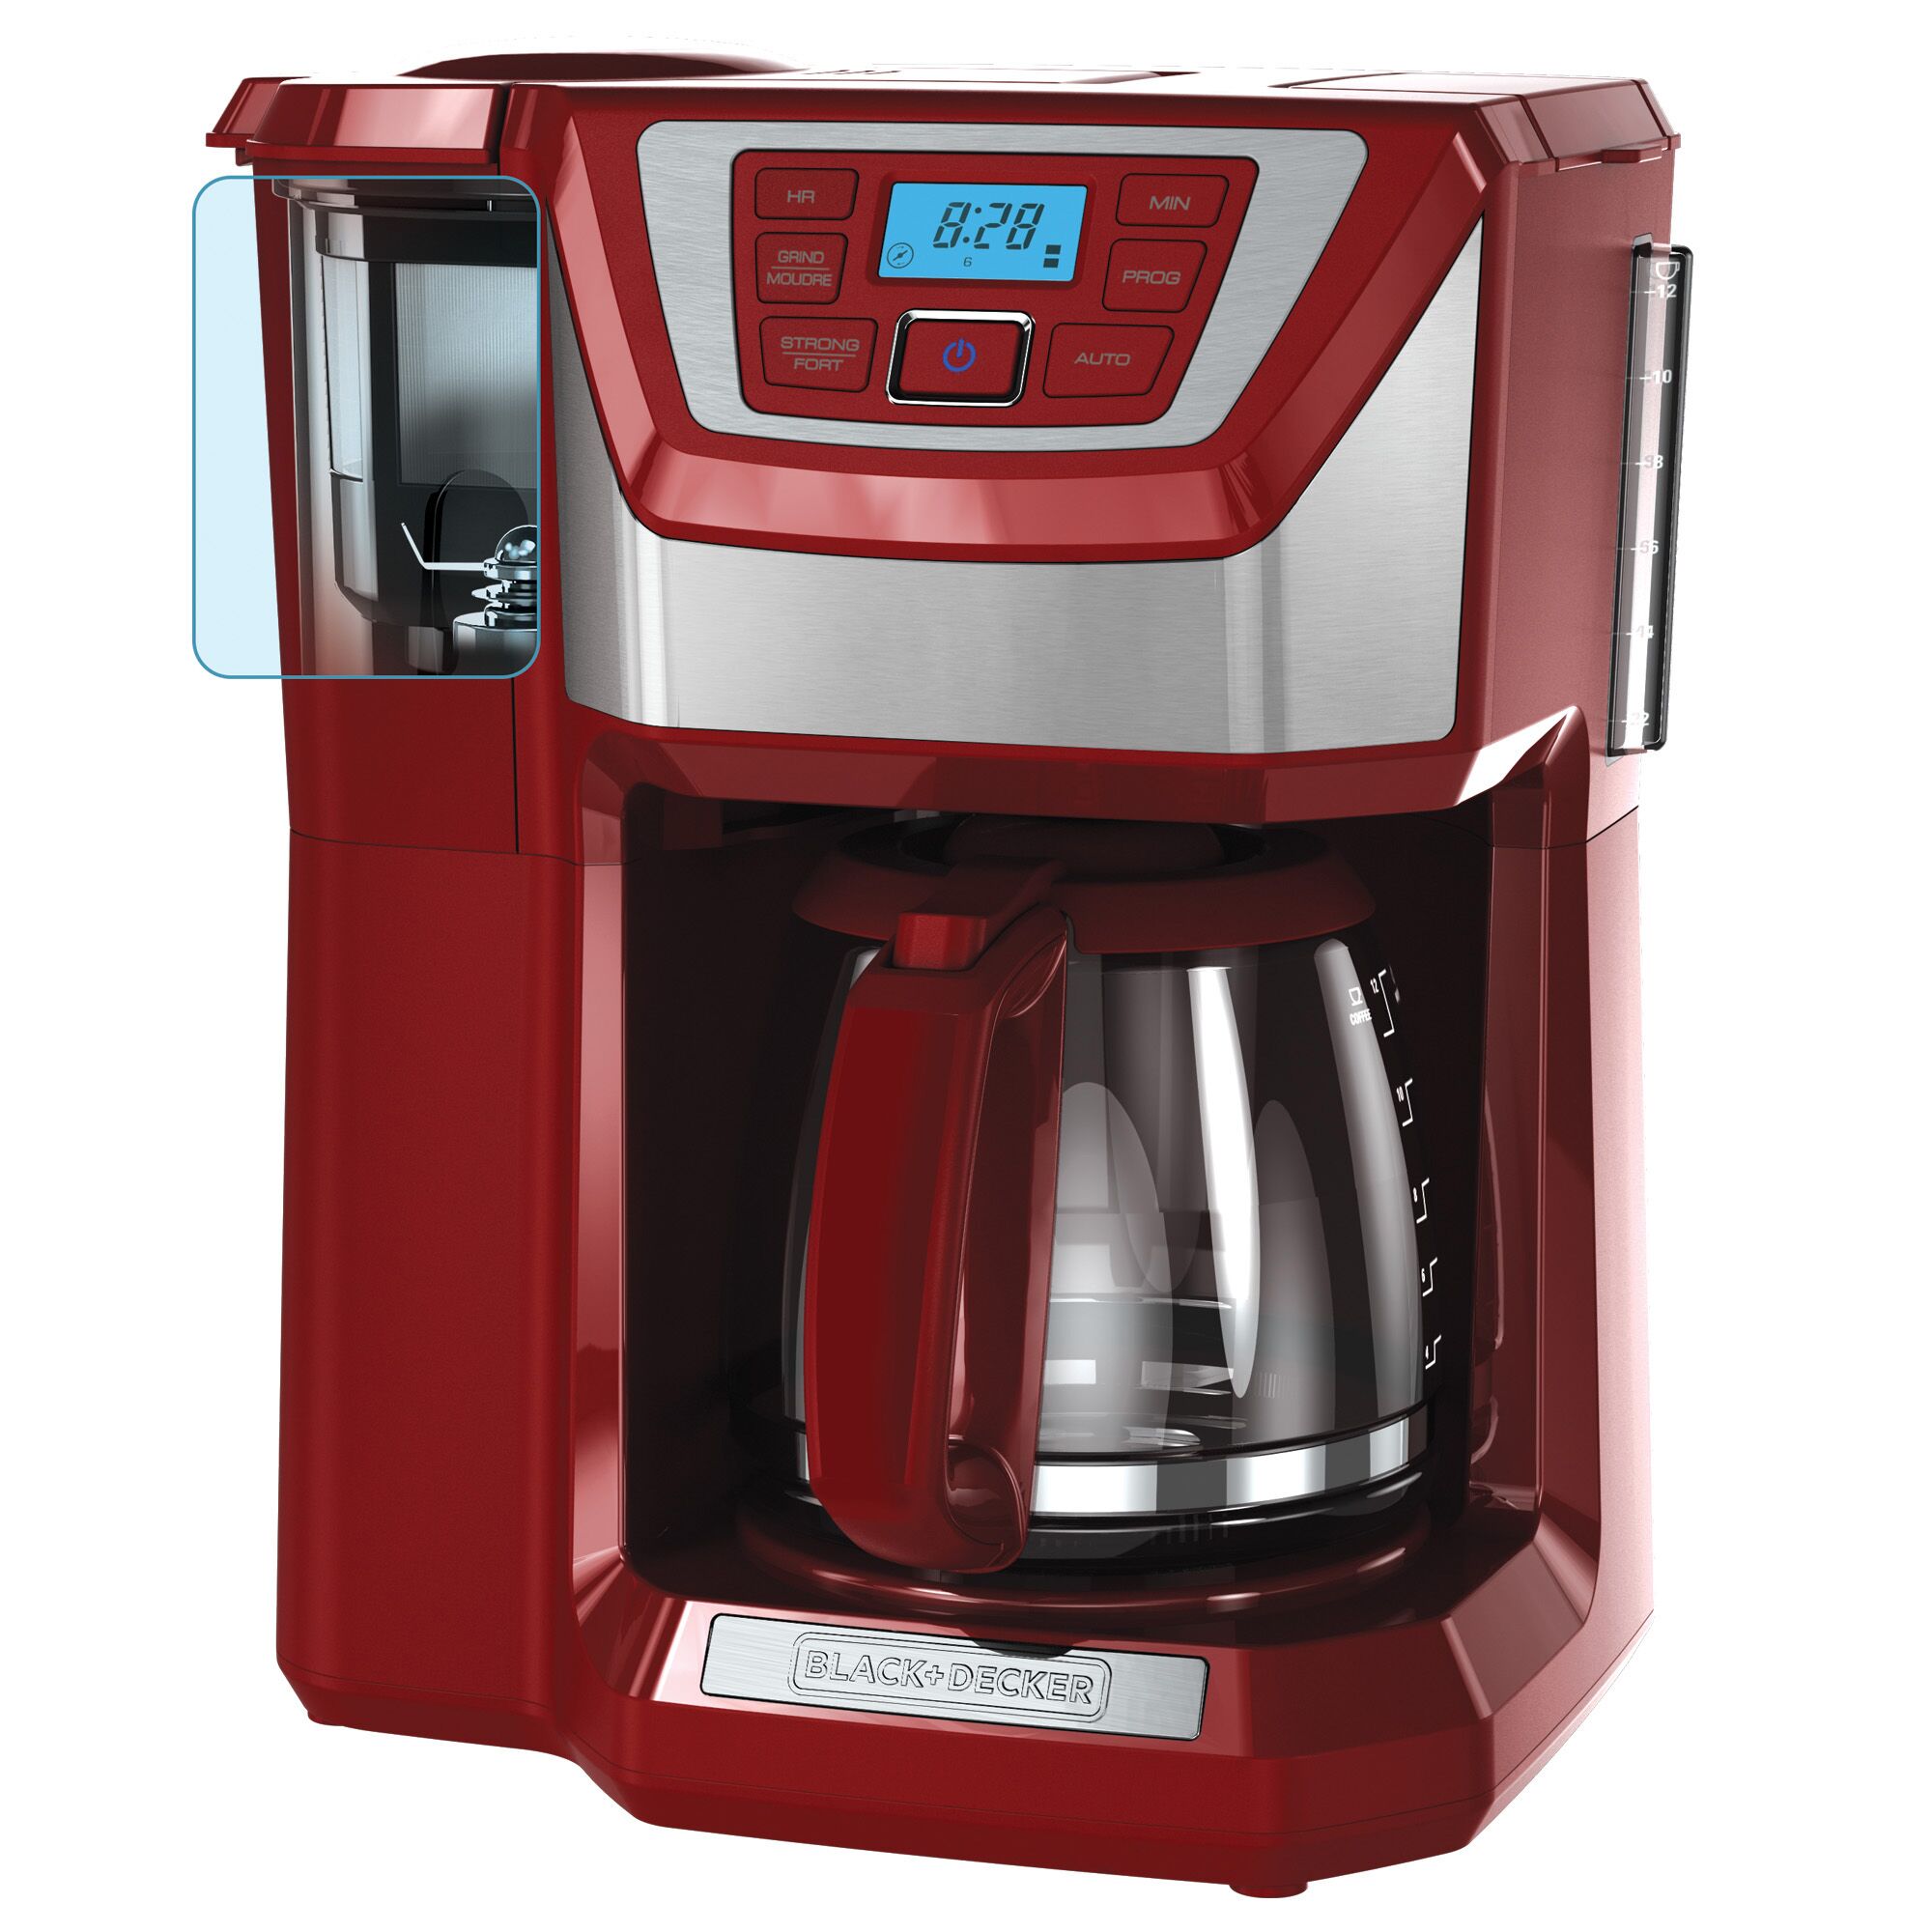 Front view of the BLACK+DECKER coffee maker showing the digital display